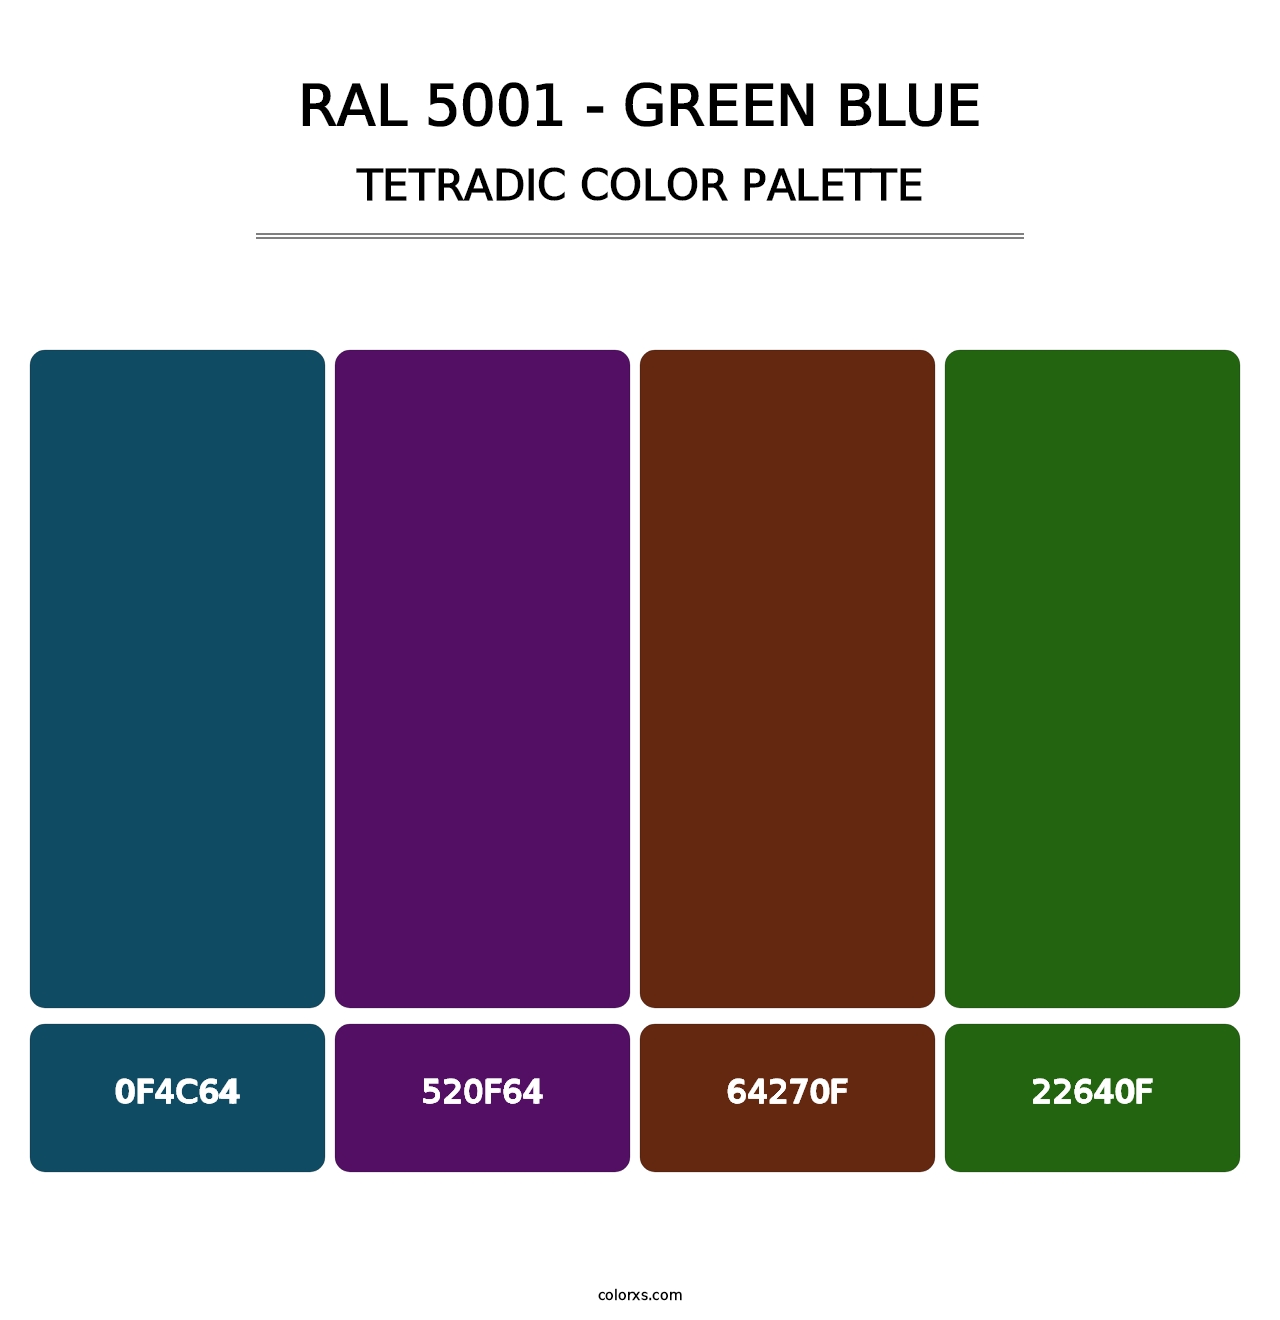 RAL 5001 - Green Blue - Tetradic Color Palette